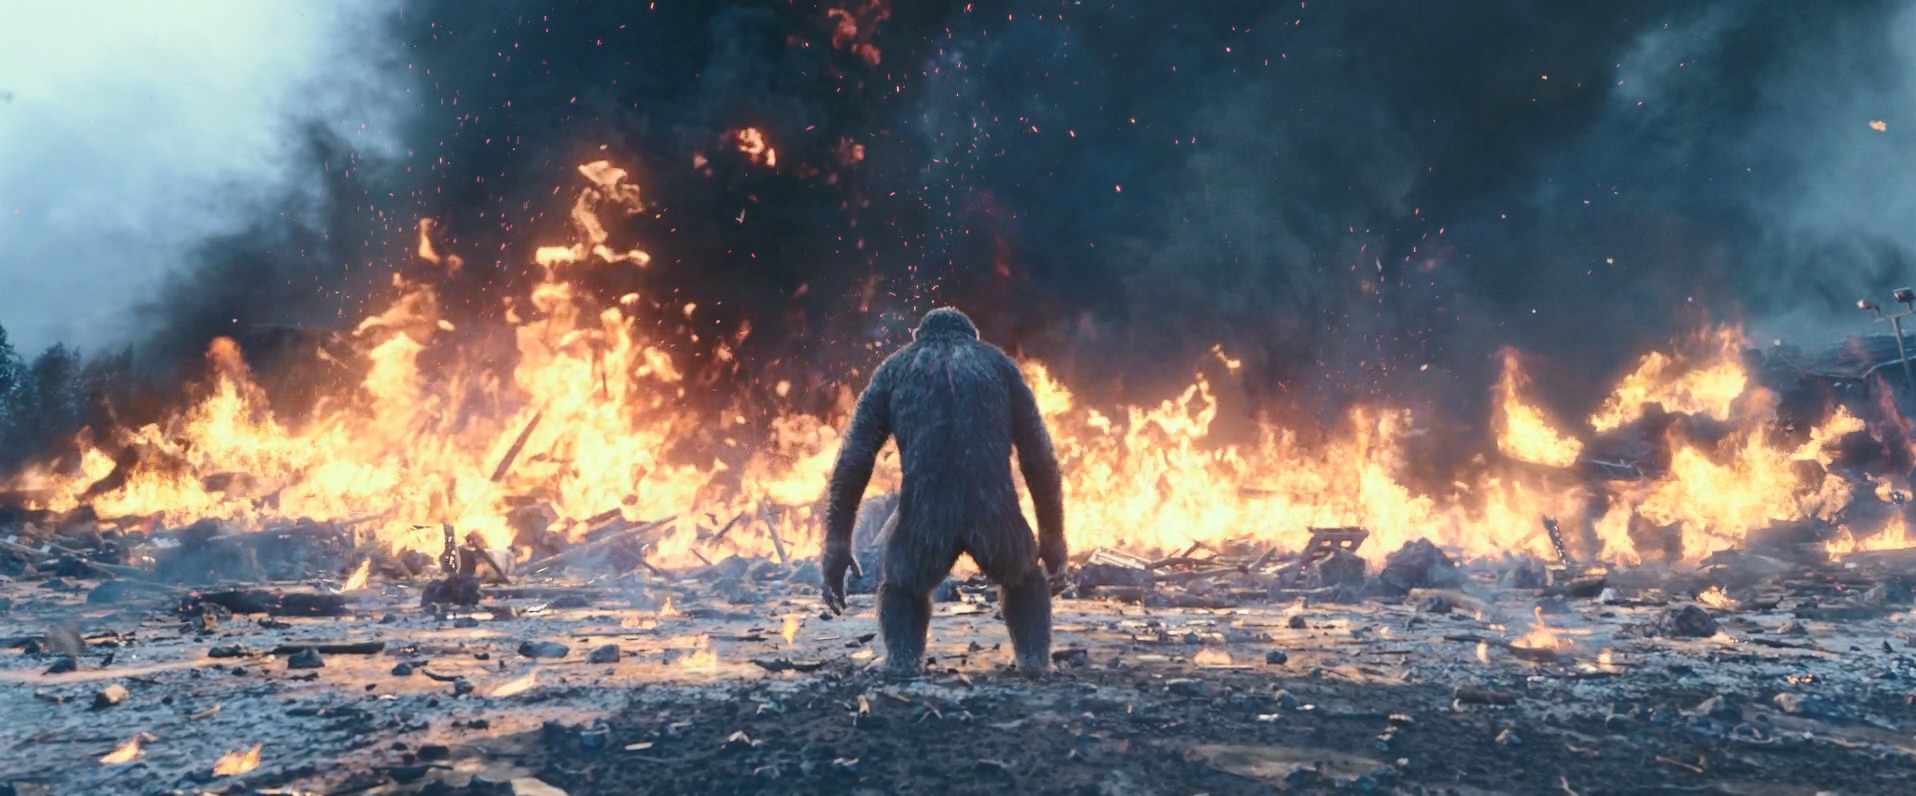 war_for_the_planet_of_the_apes_205336_102.jpg